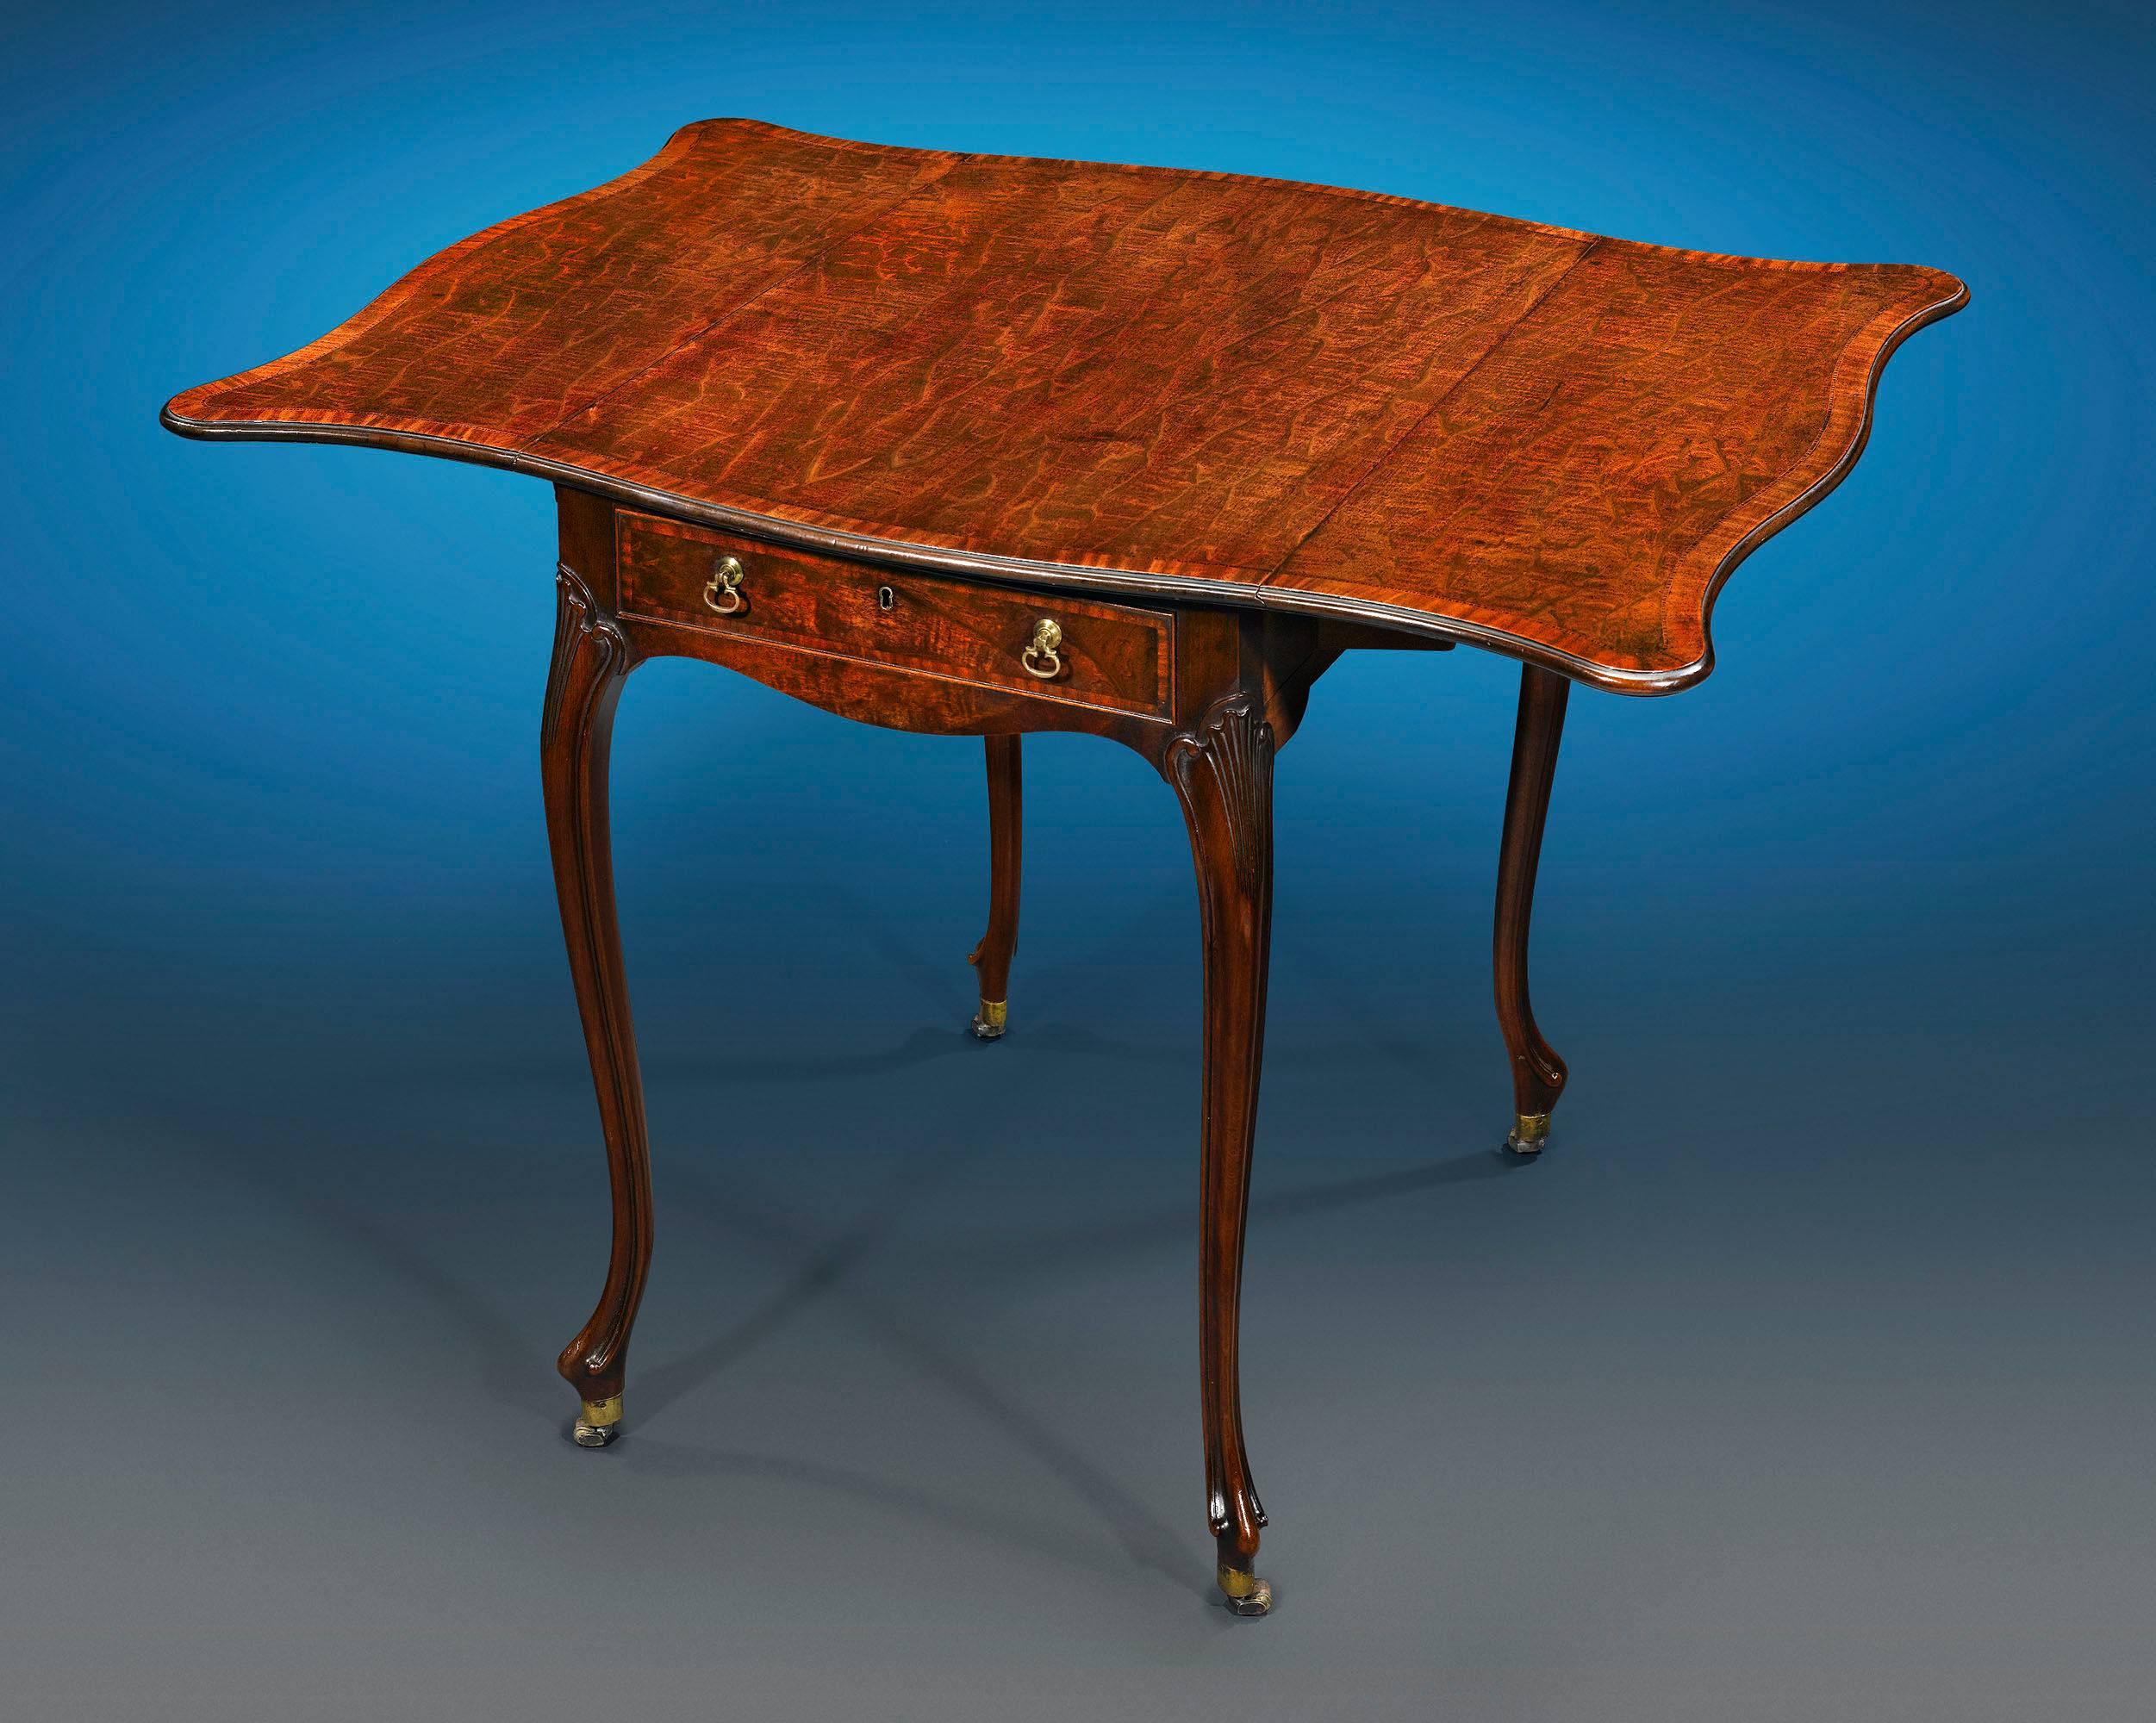 This highly important Pembroke table was crafted by the iconic Thomas Chippendale and is counted as one of the few rare examples made by his hand that are still in private hands. An unquestionable masterpiece, this mahogany and satinwood table also